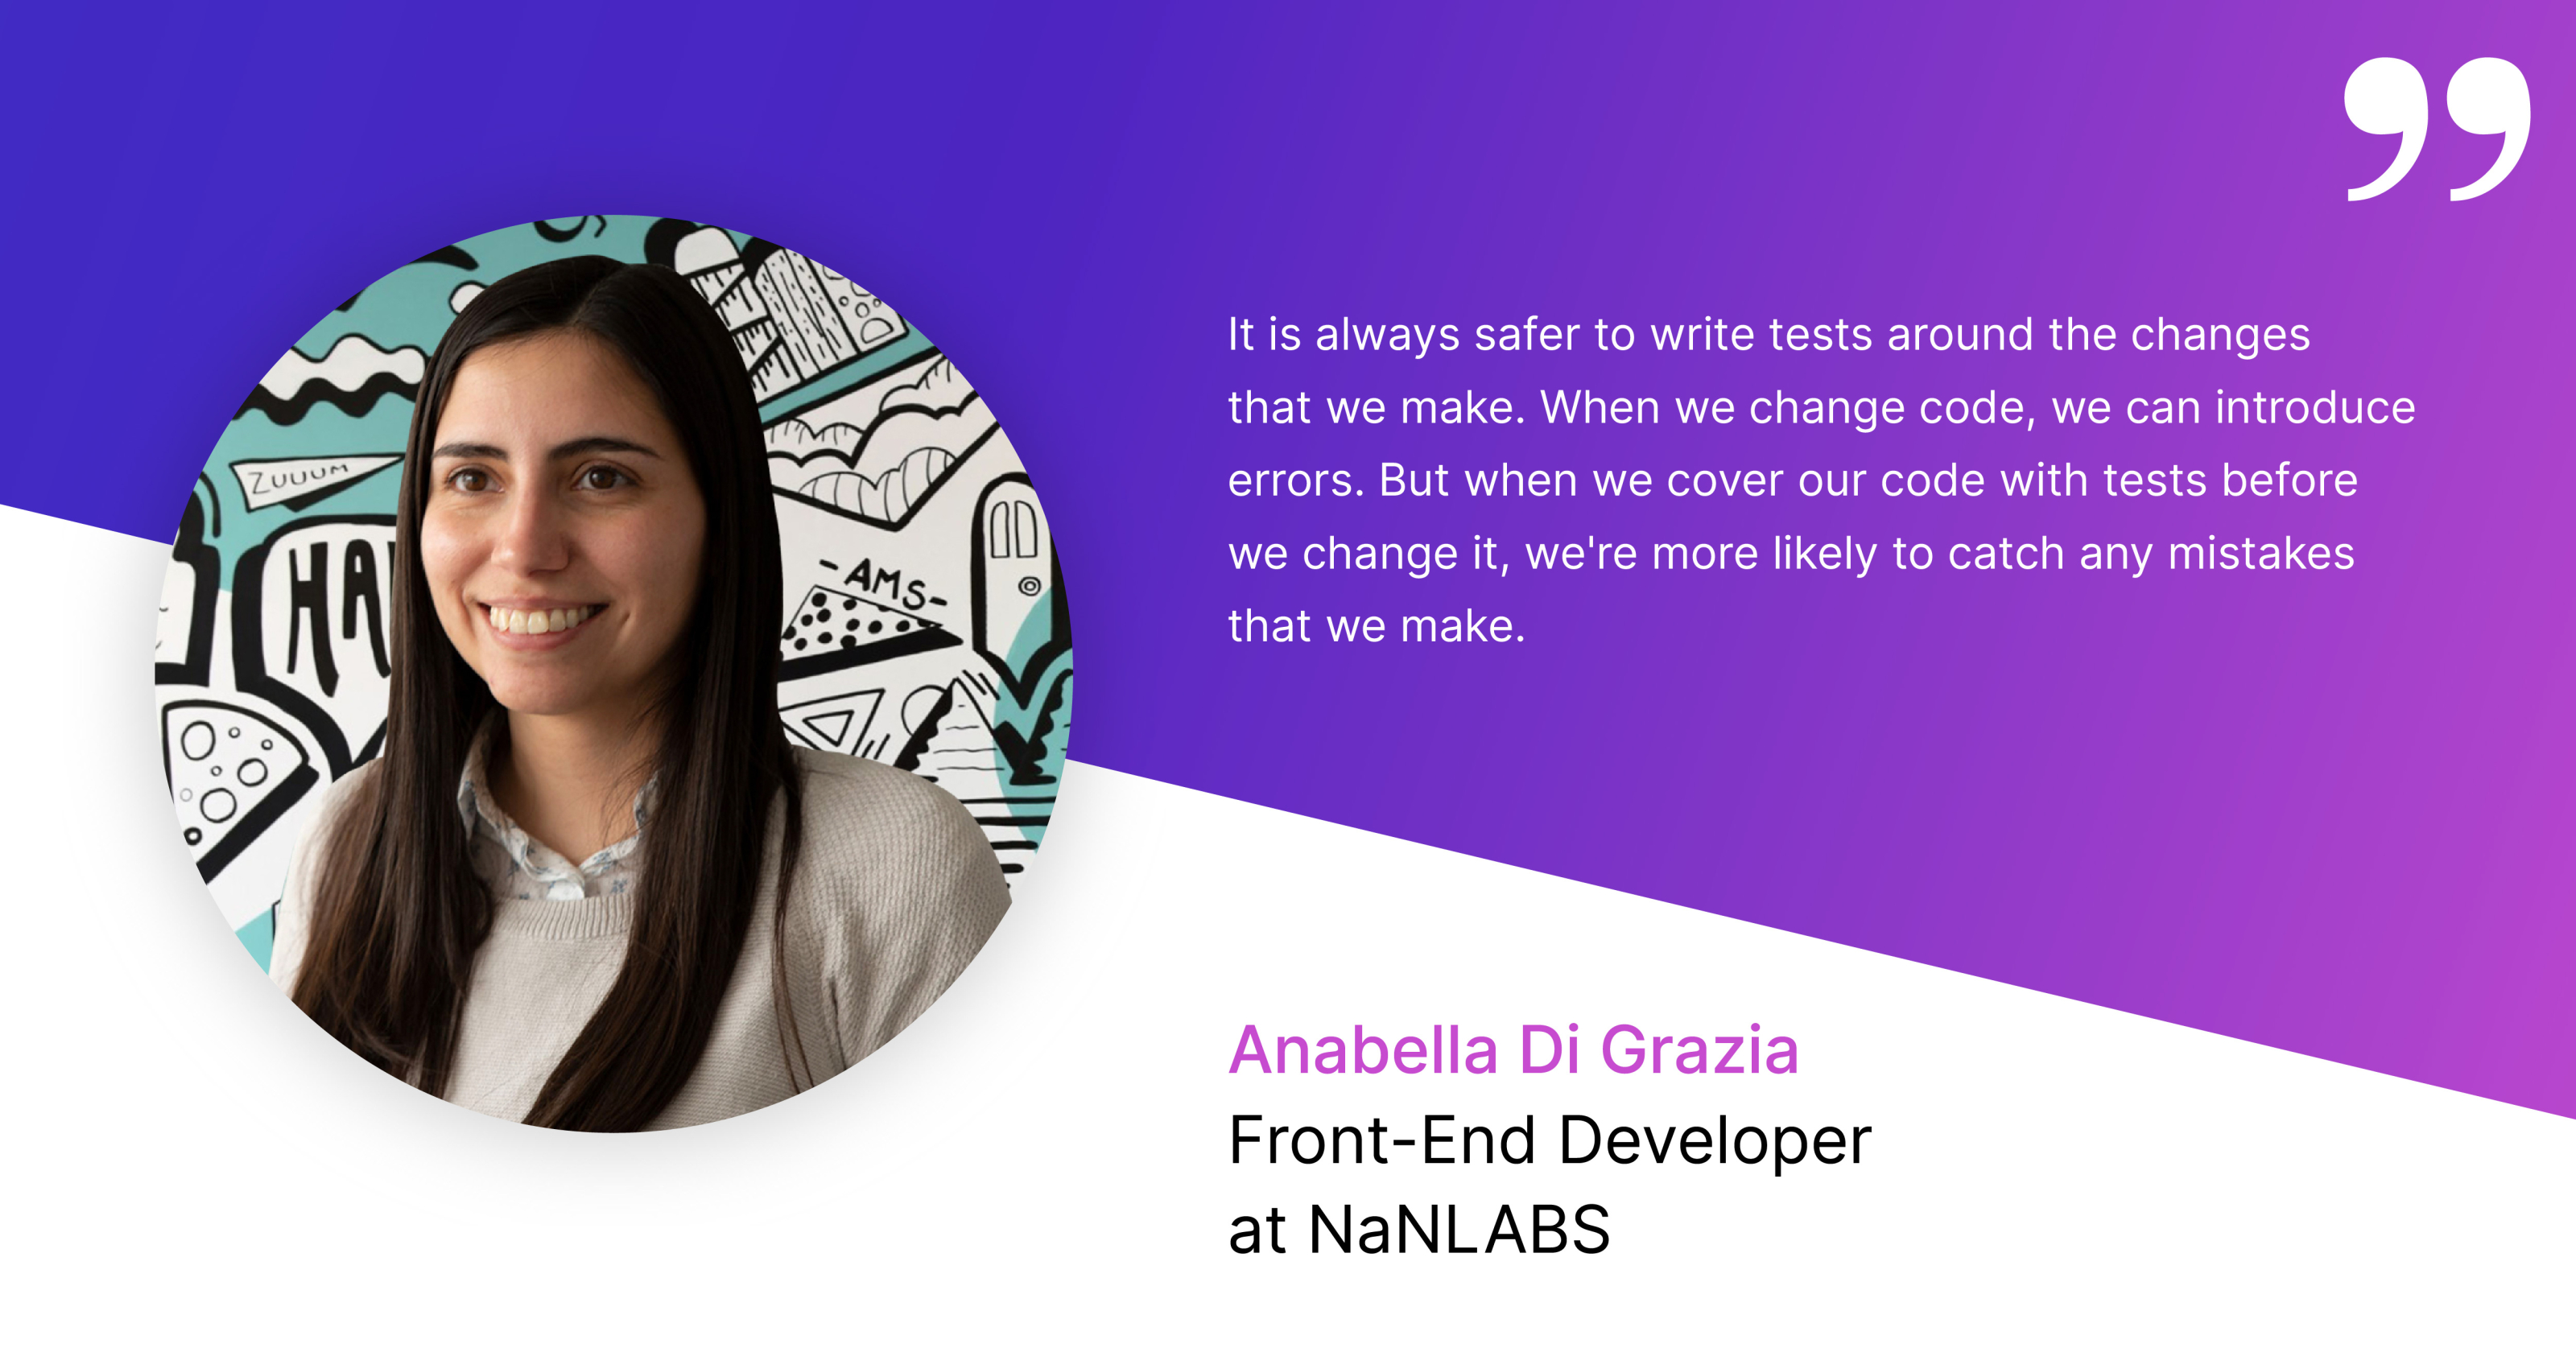 Quote about refactoring at CyberCube by Anabella Di Grazia, Front-End Developer at NaNLABS 